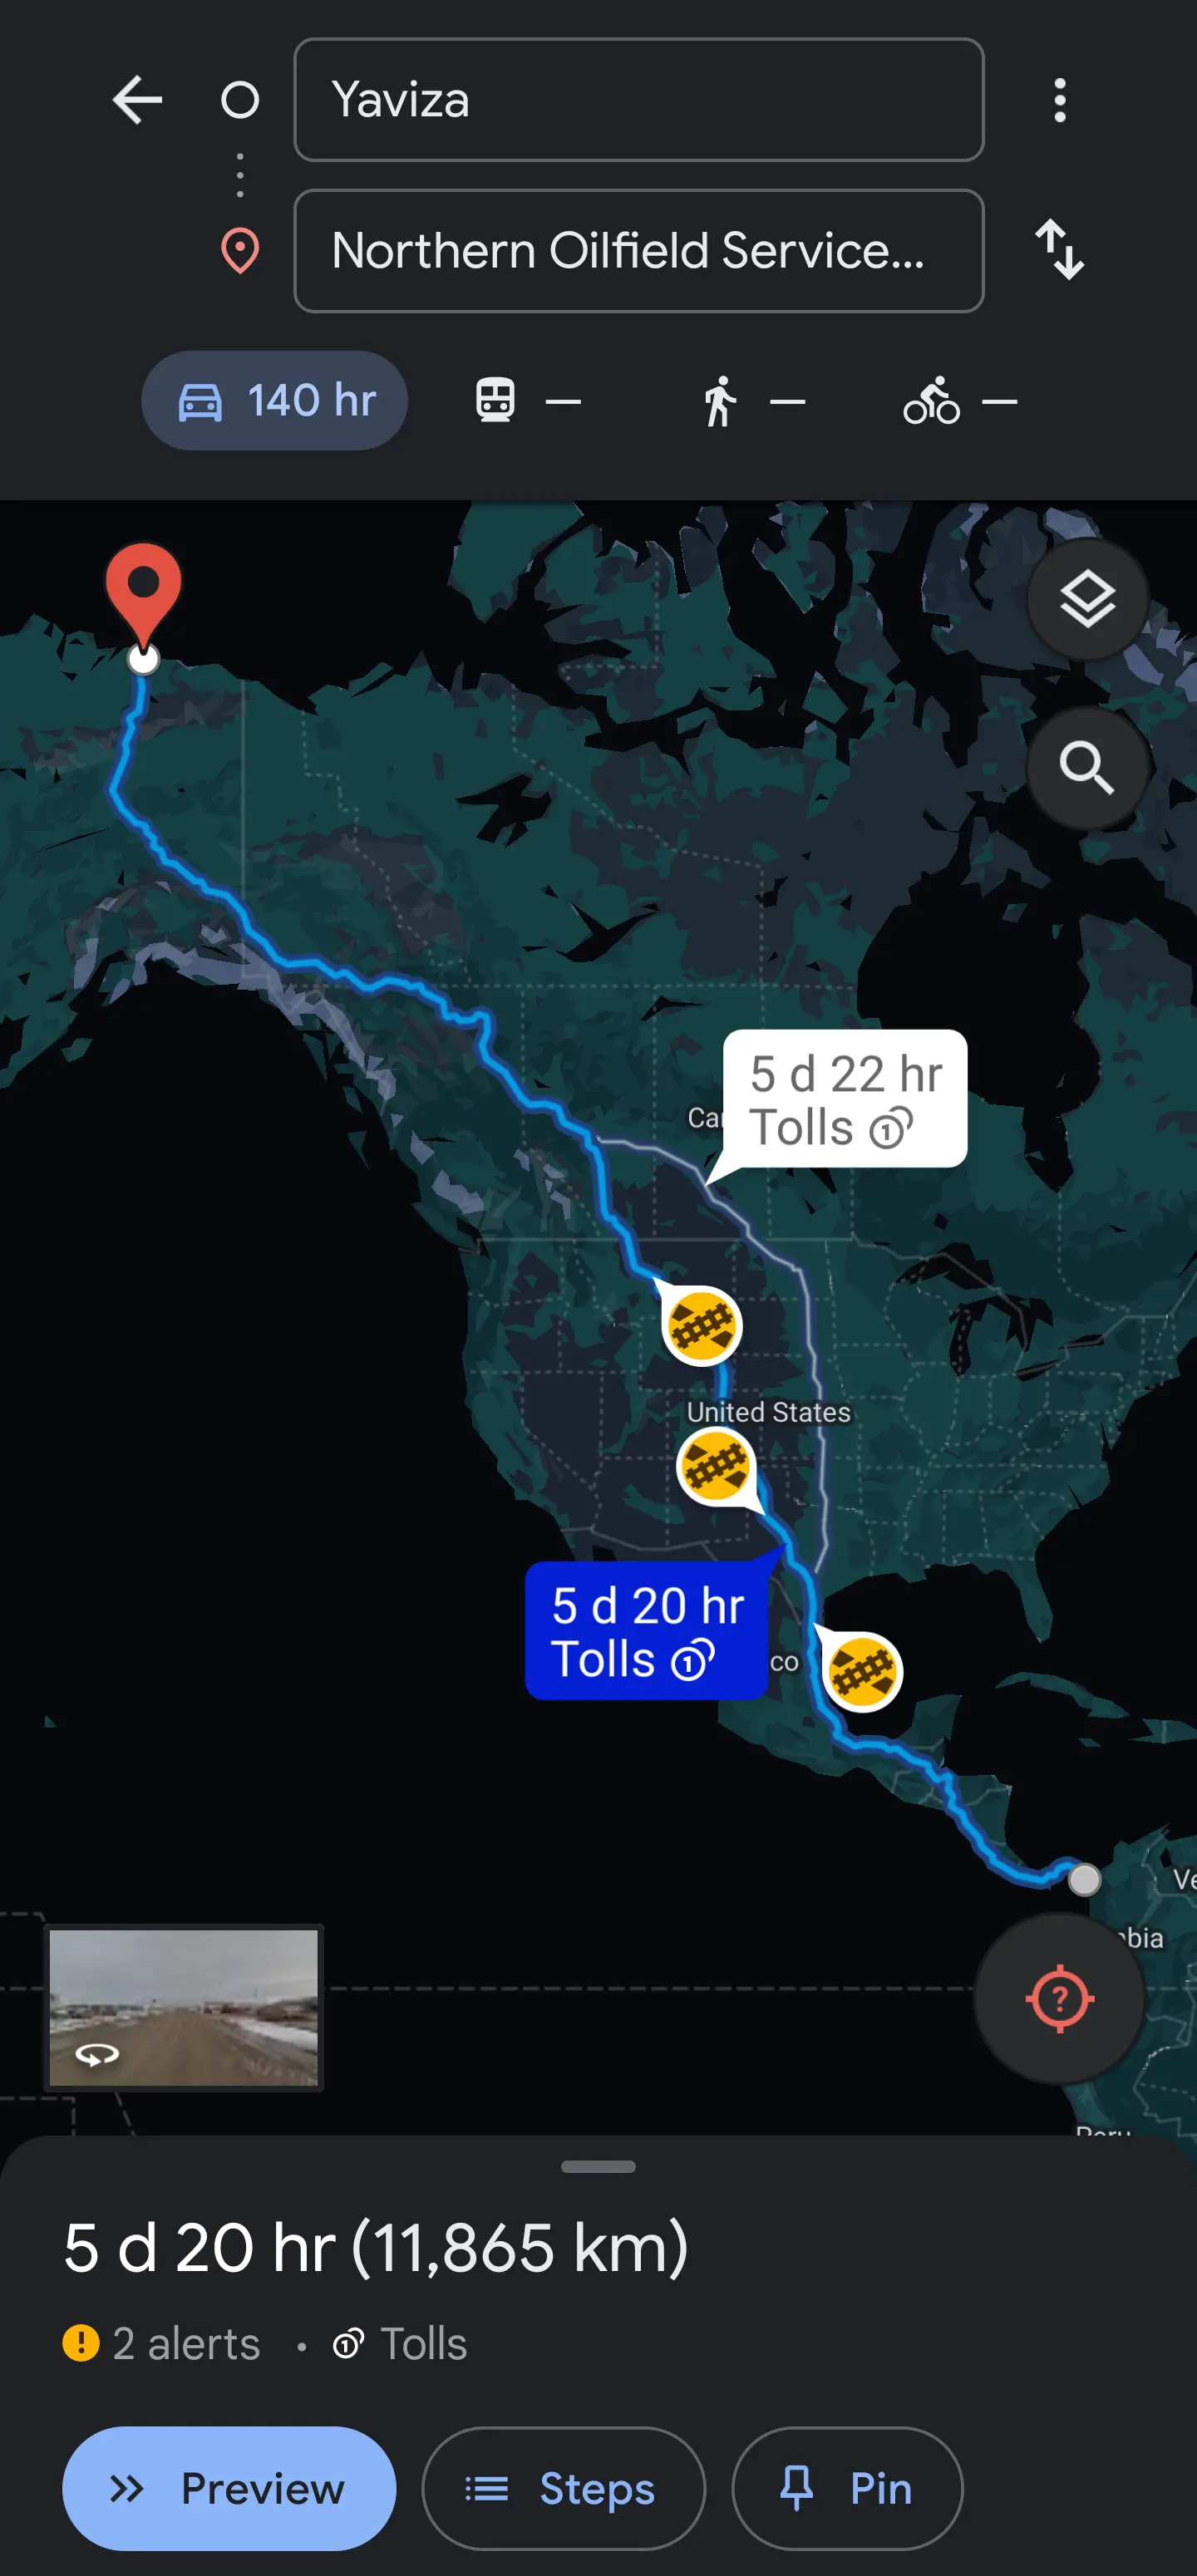 5 days 20 hours to drive from bottom of Panama to top of Alaska